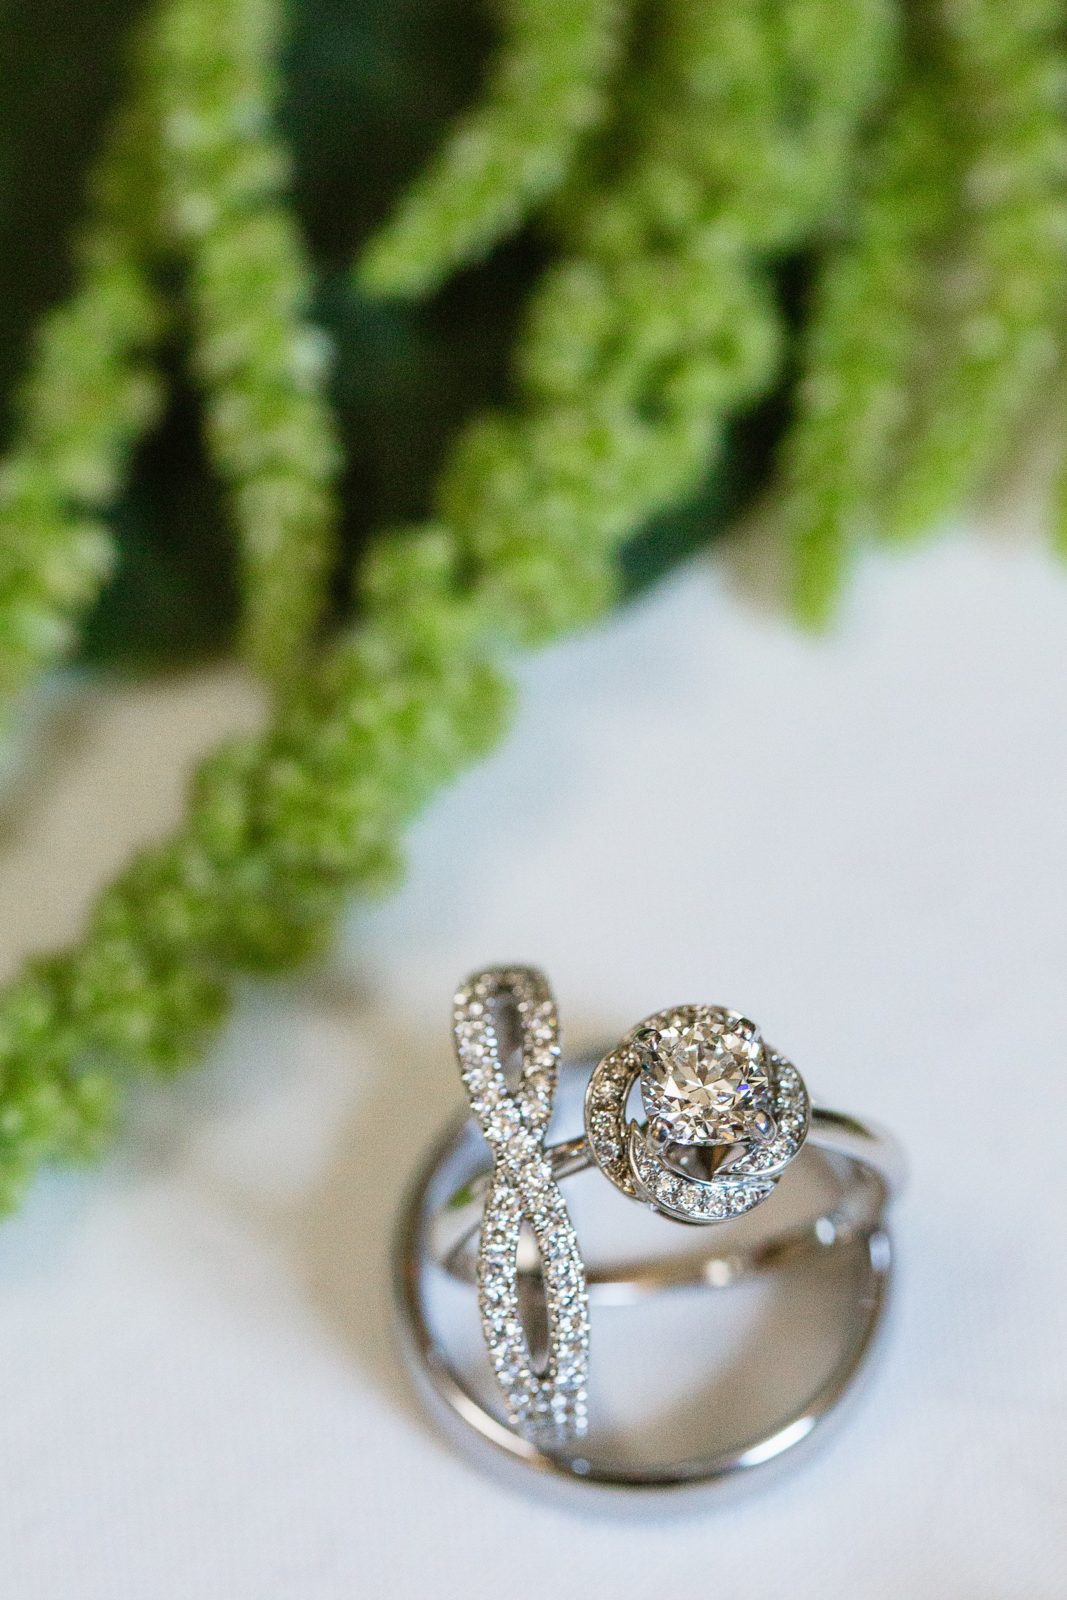 Garden inspired white gold and diamond wedding ring and bands by PMA Photography.